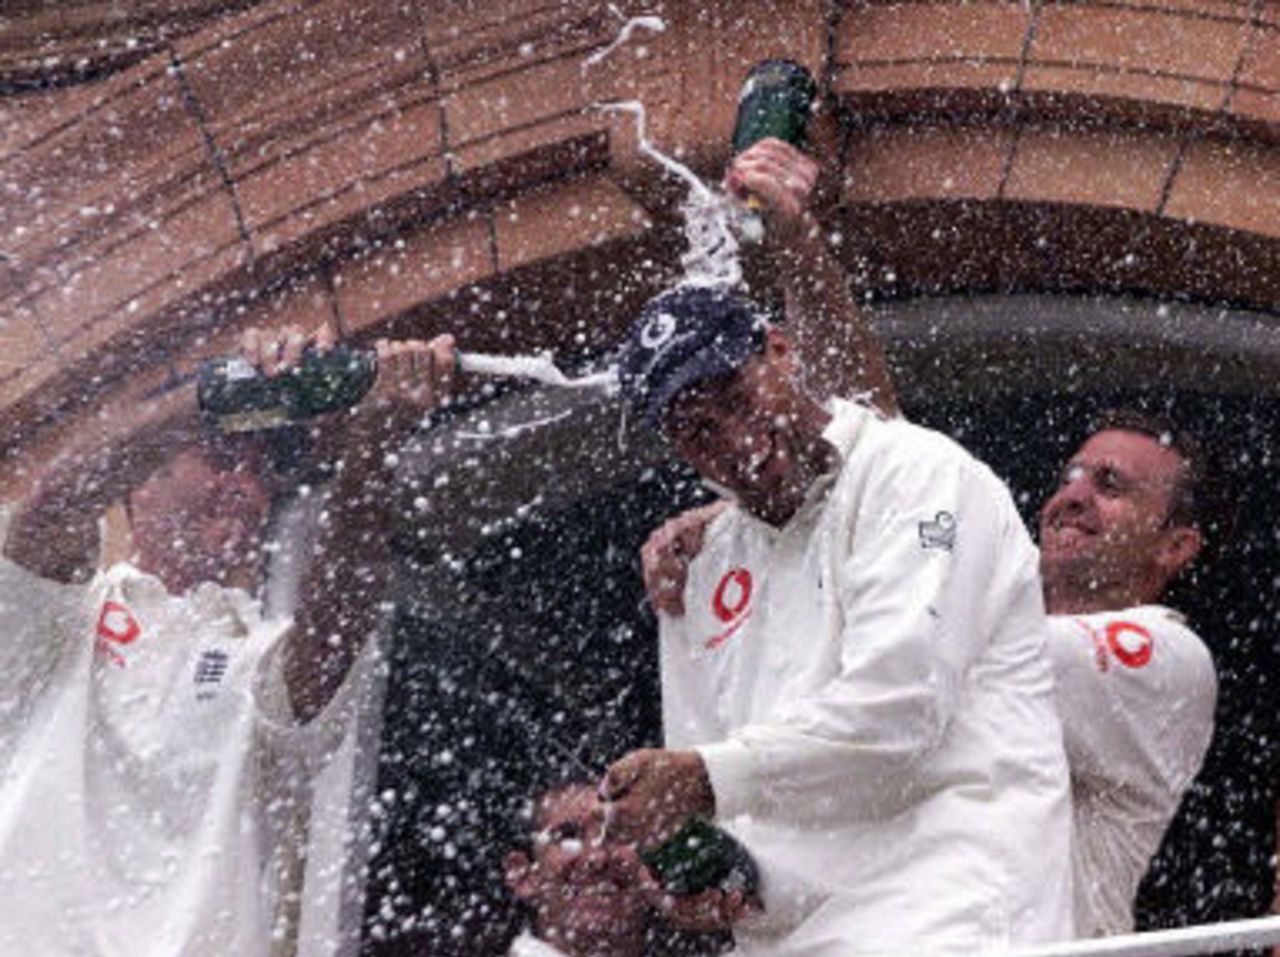 Some of the England team celebrating the win, day 4, 1st Test at Lord's, 17-21 May 2001.